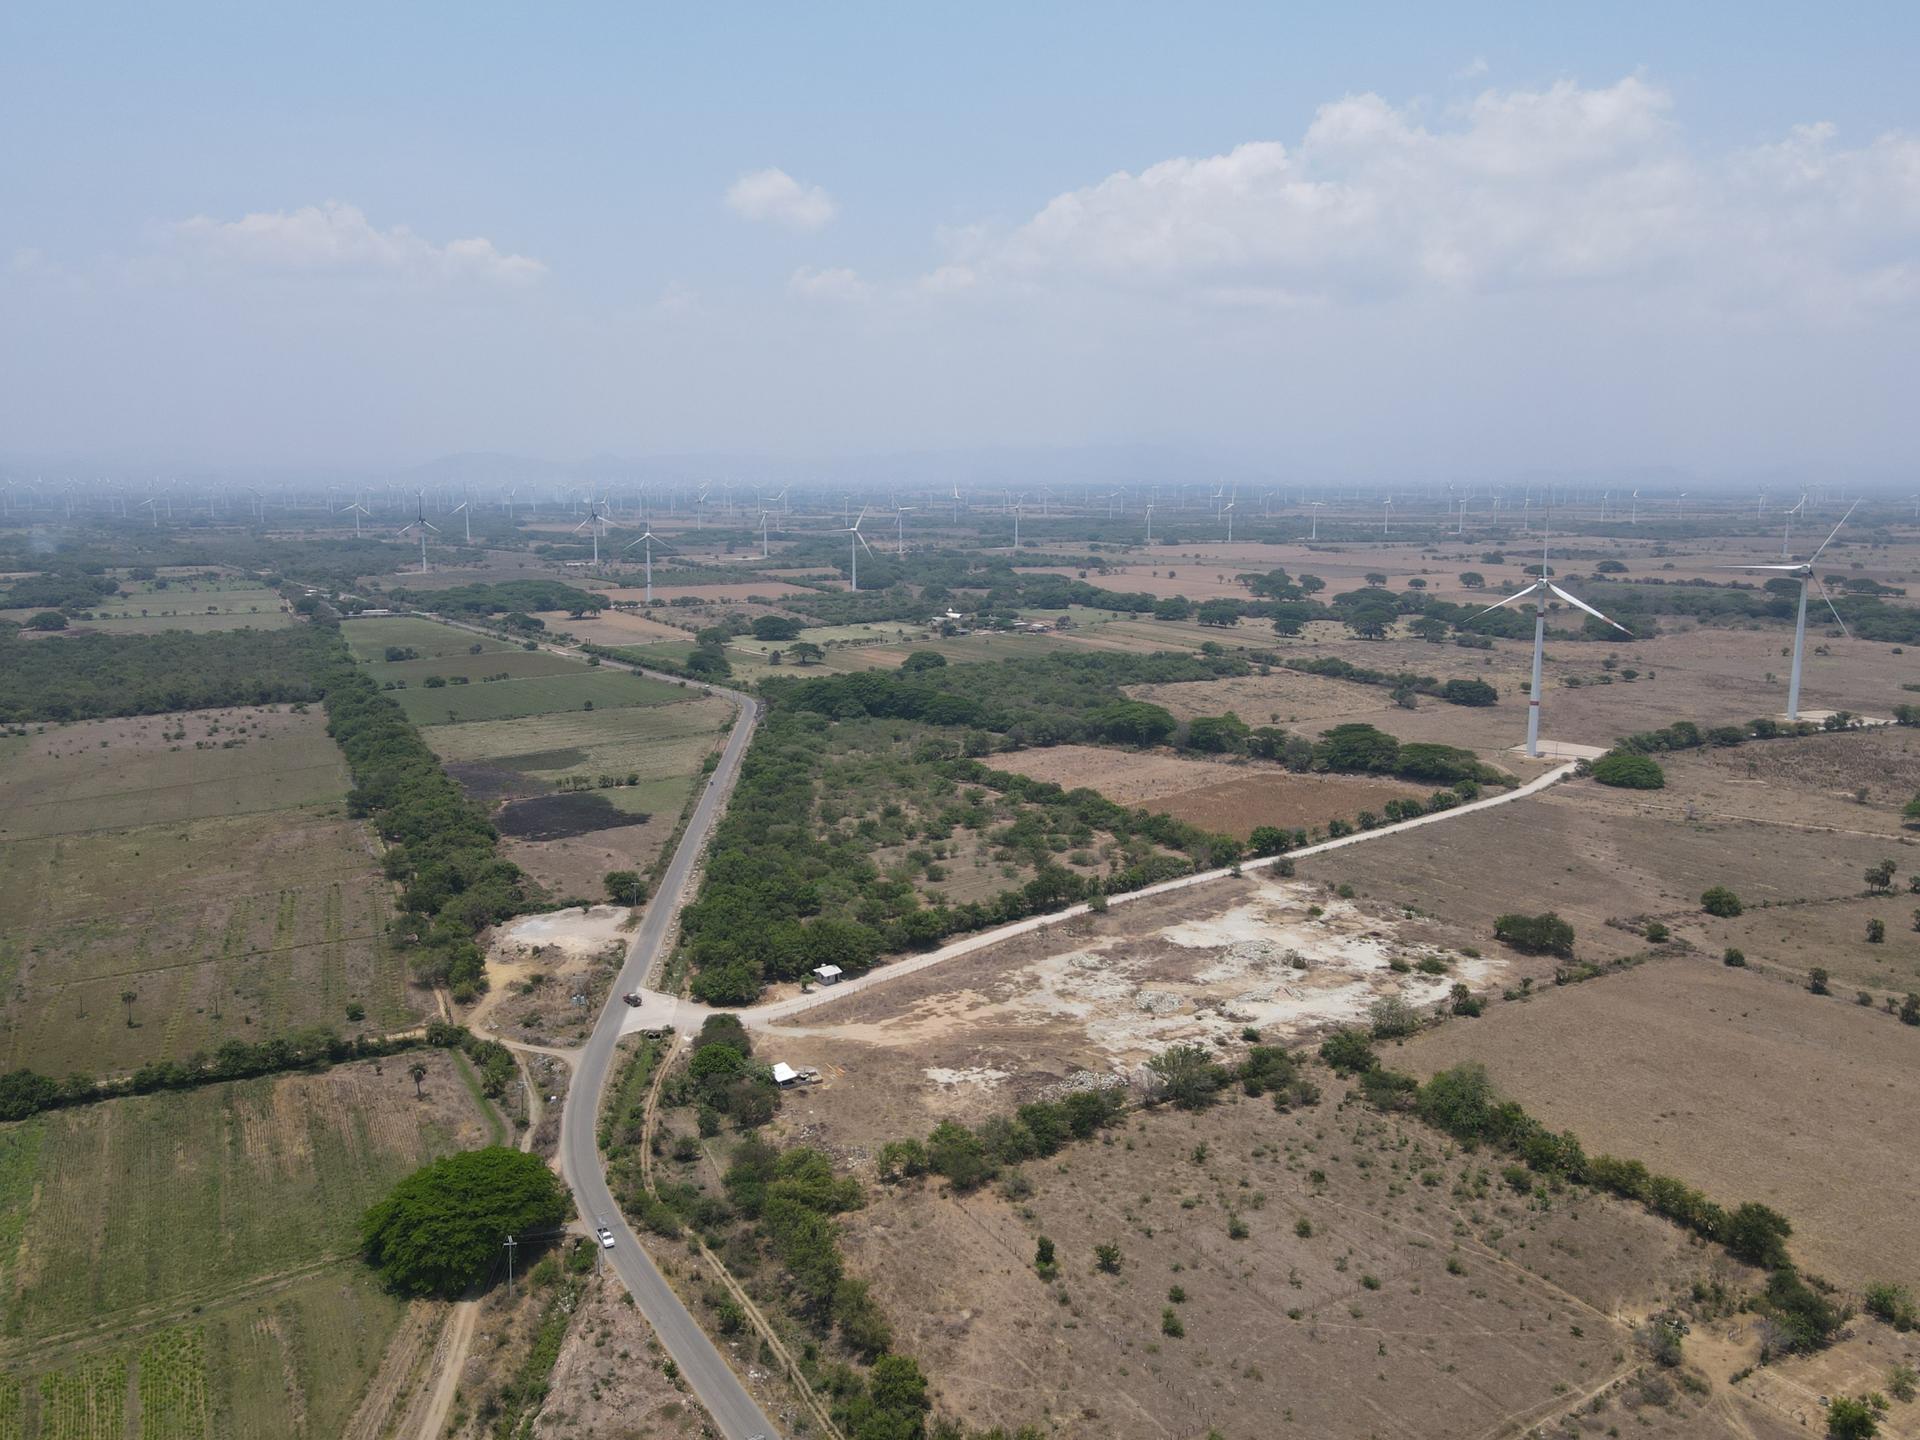 Wind farms around the town of Juchitán de Zaragoza in Mexico, which is in the middle of the Interoceanic Corridor.